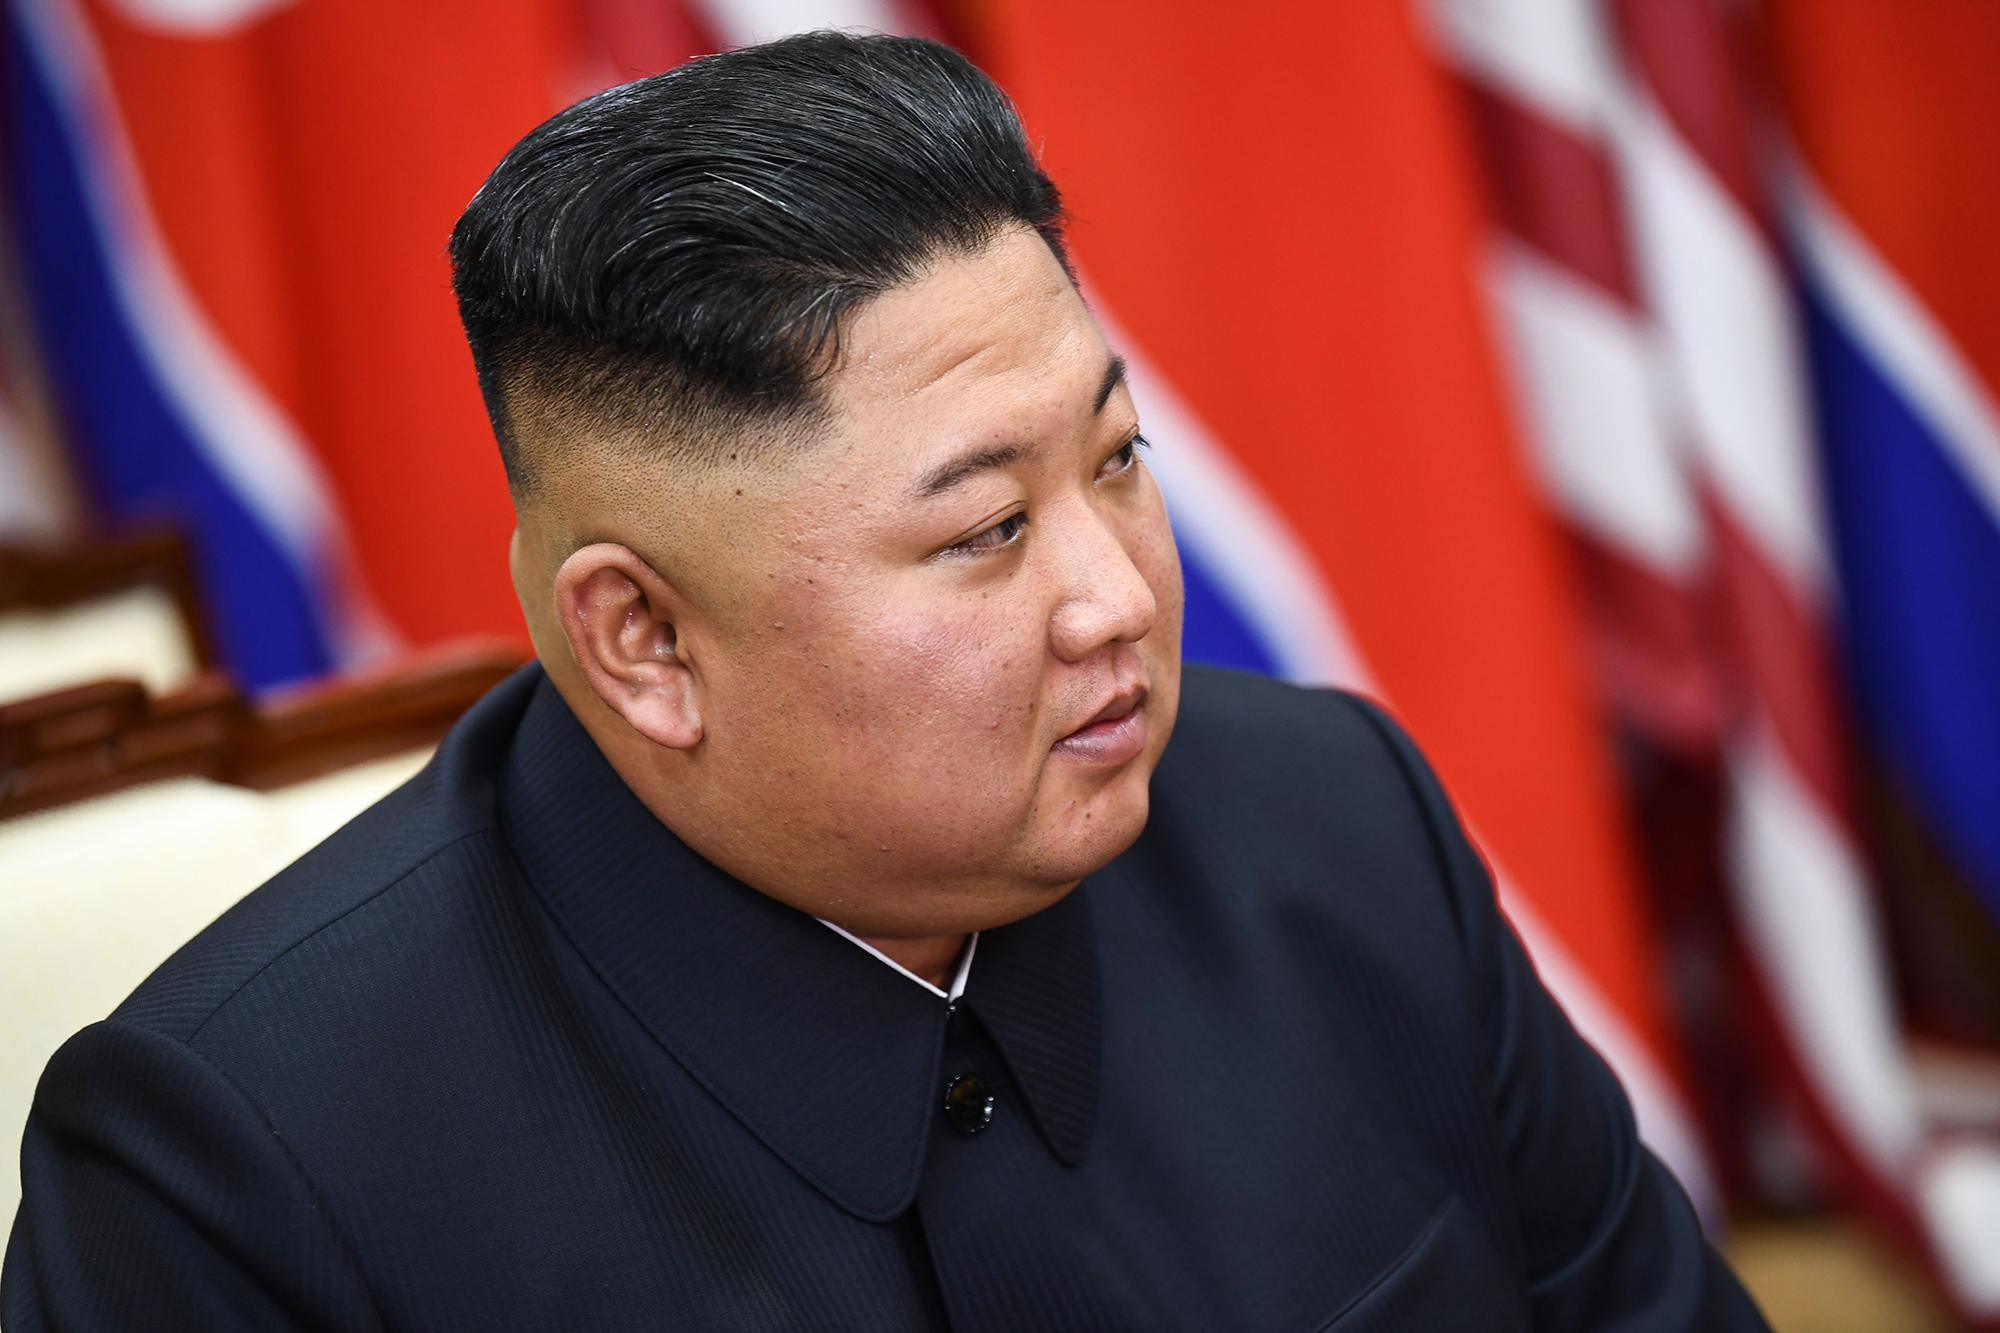 North Korea’s leader, Kim JongUn reportedly dies after botched surgery